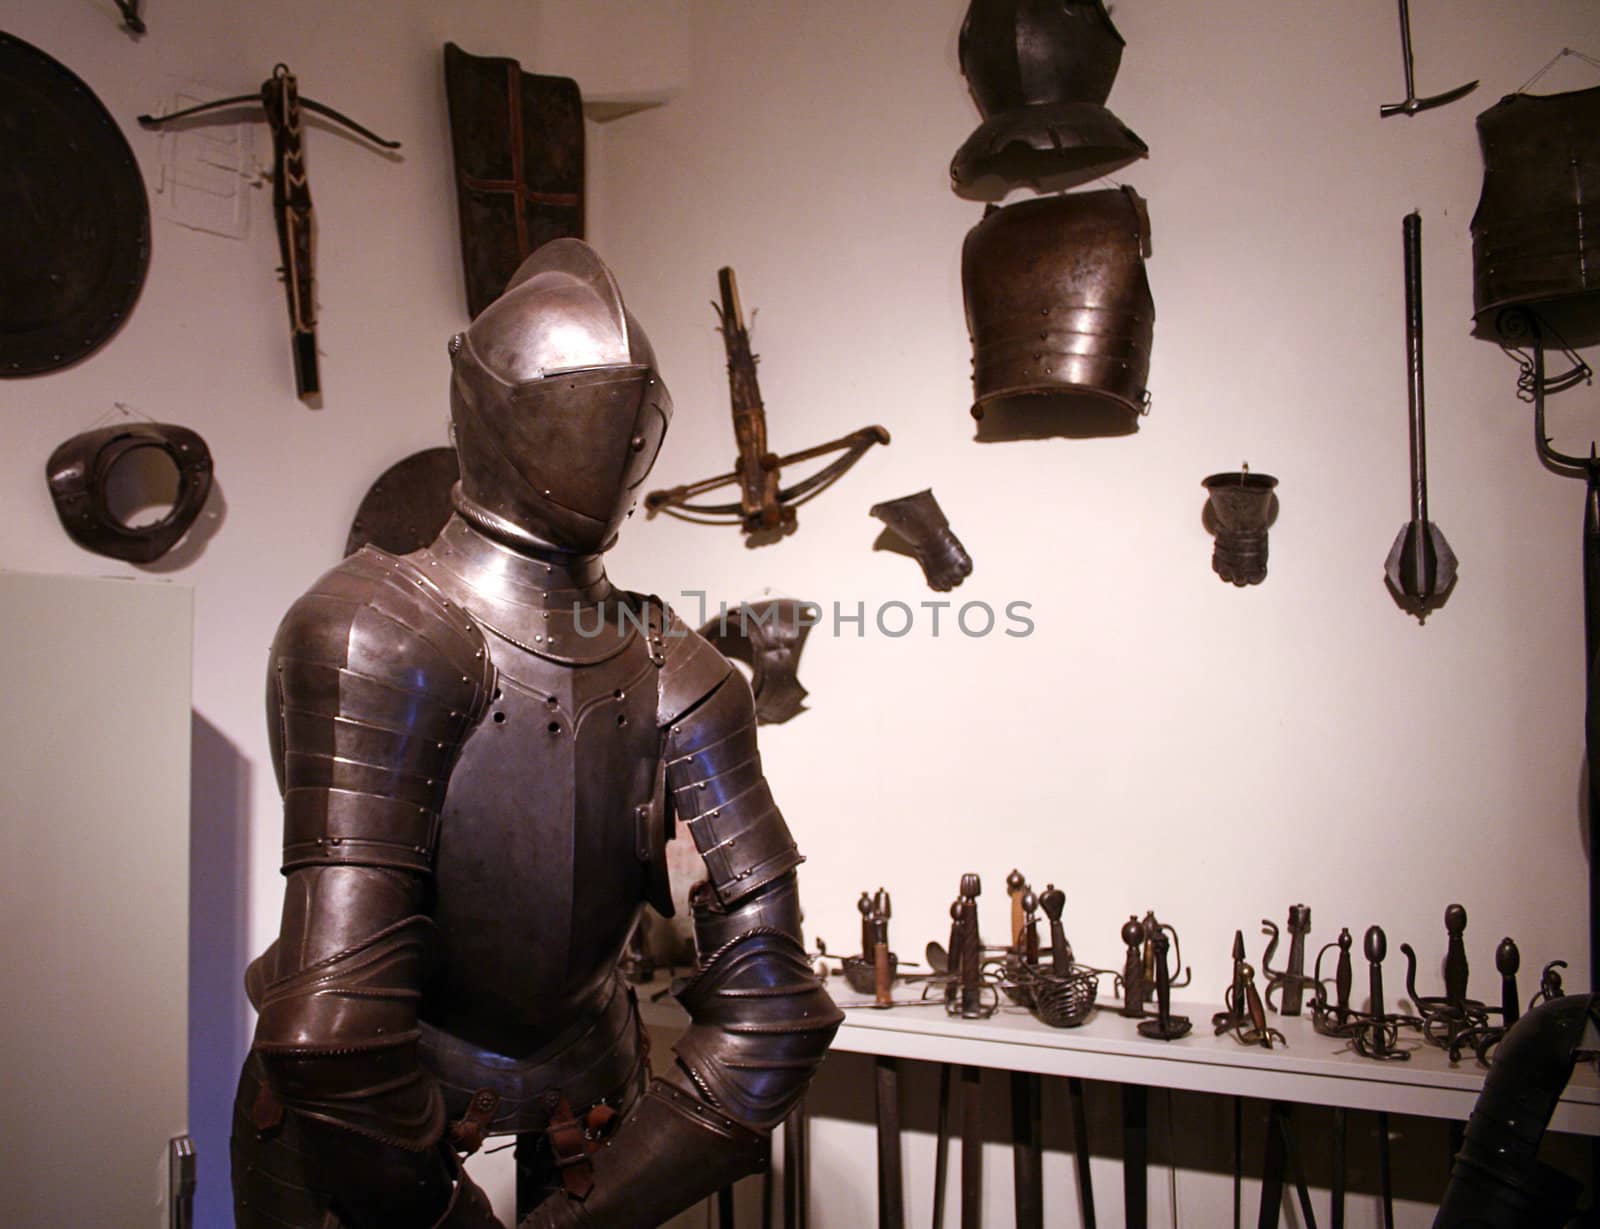 armor of an old knight with any other tools